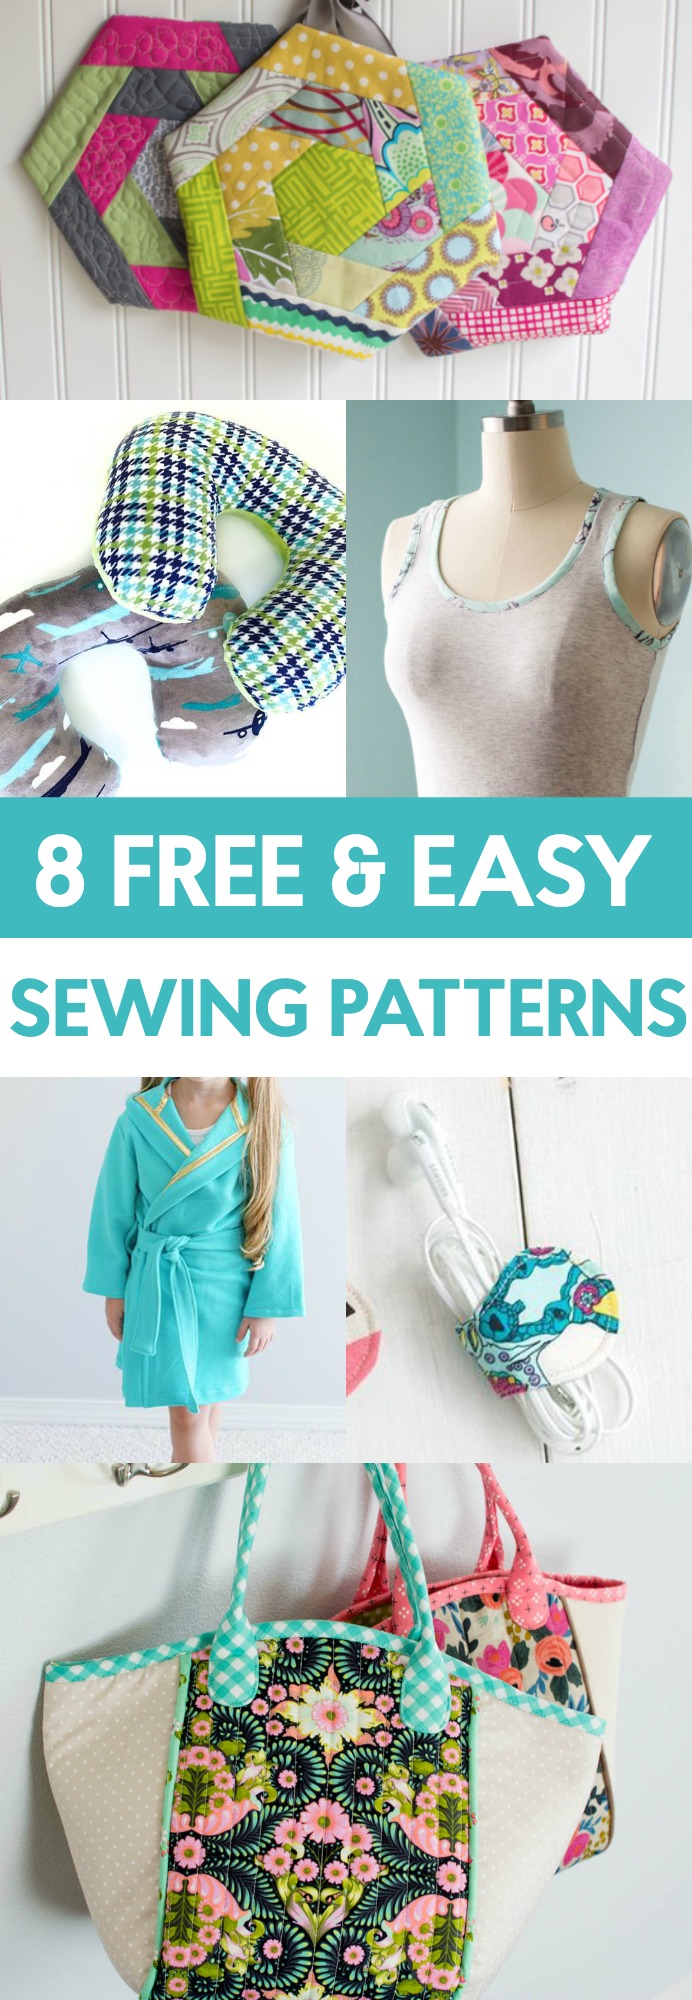 8 Free Sewing Patterns for Beginners - A Little Craft In Your Day